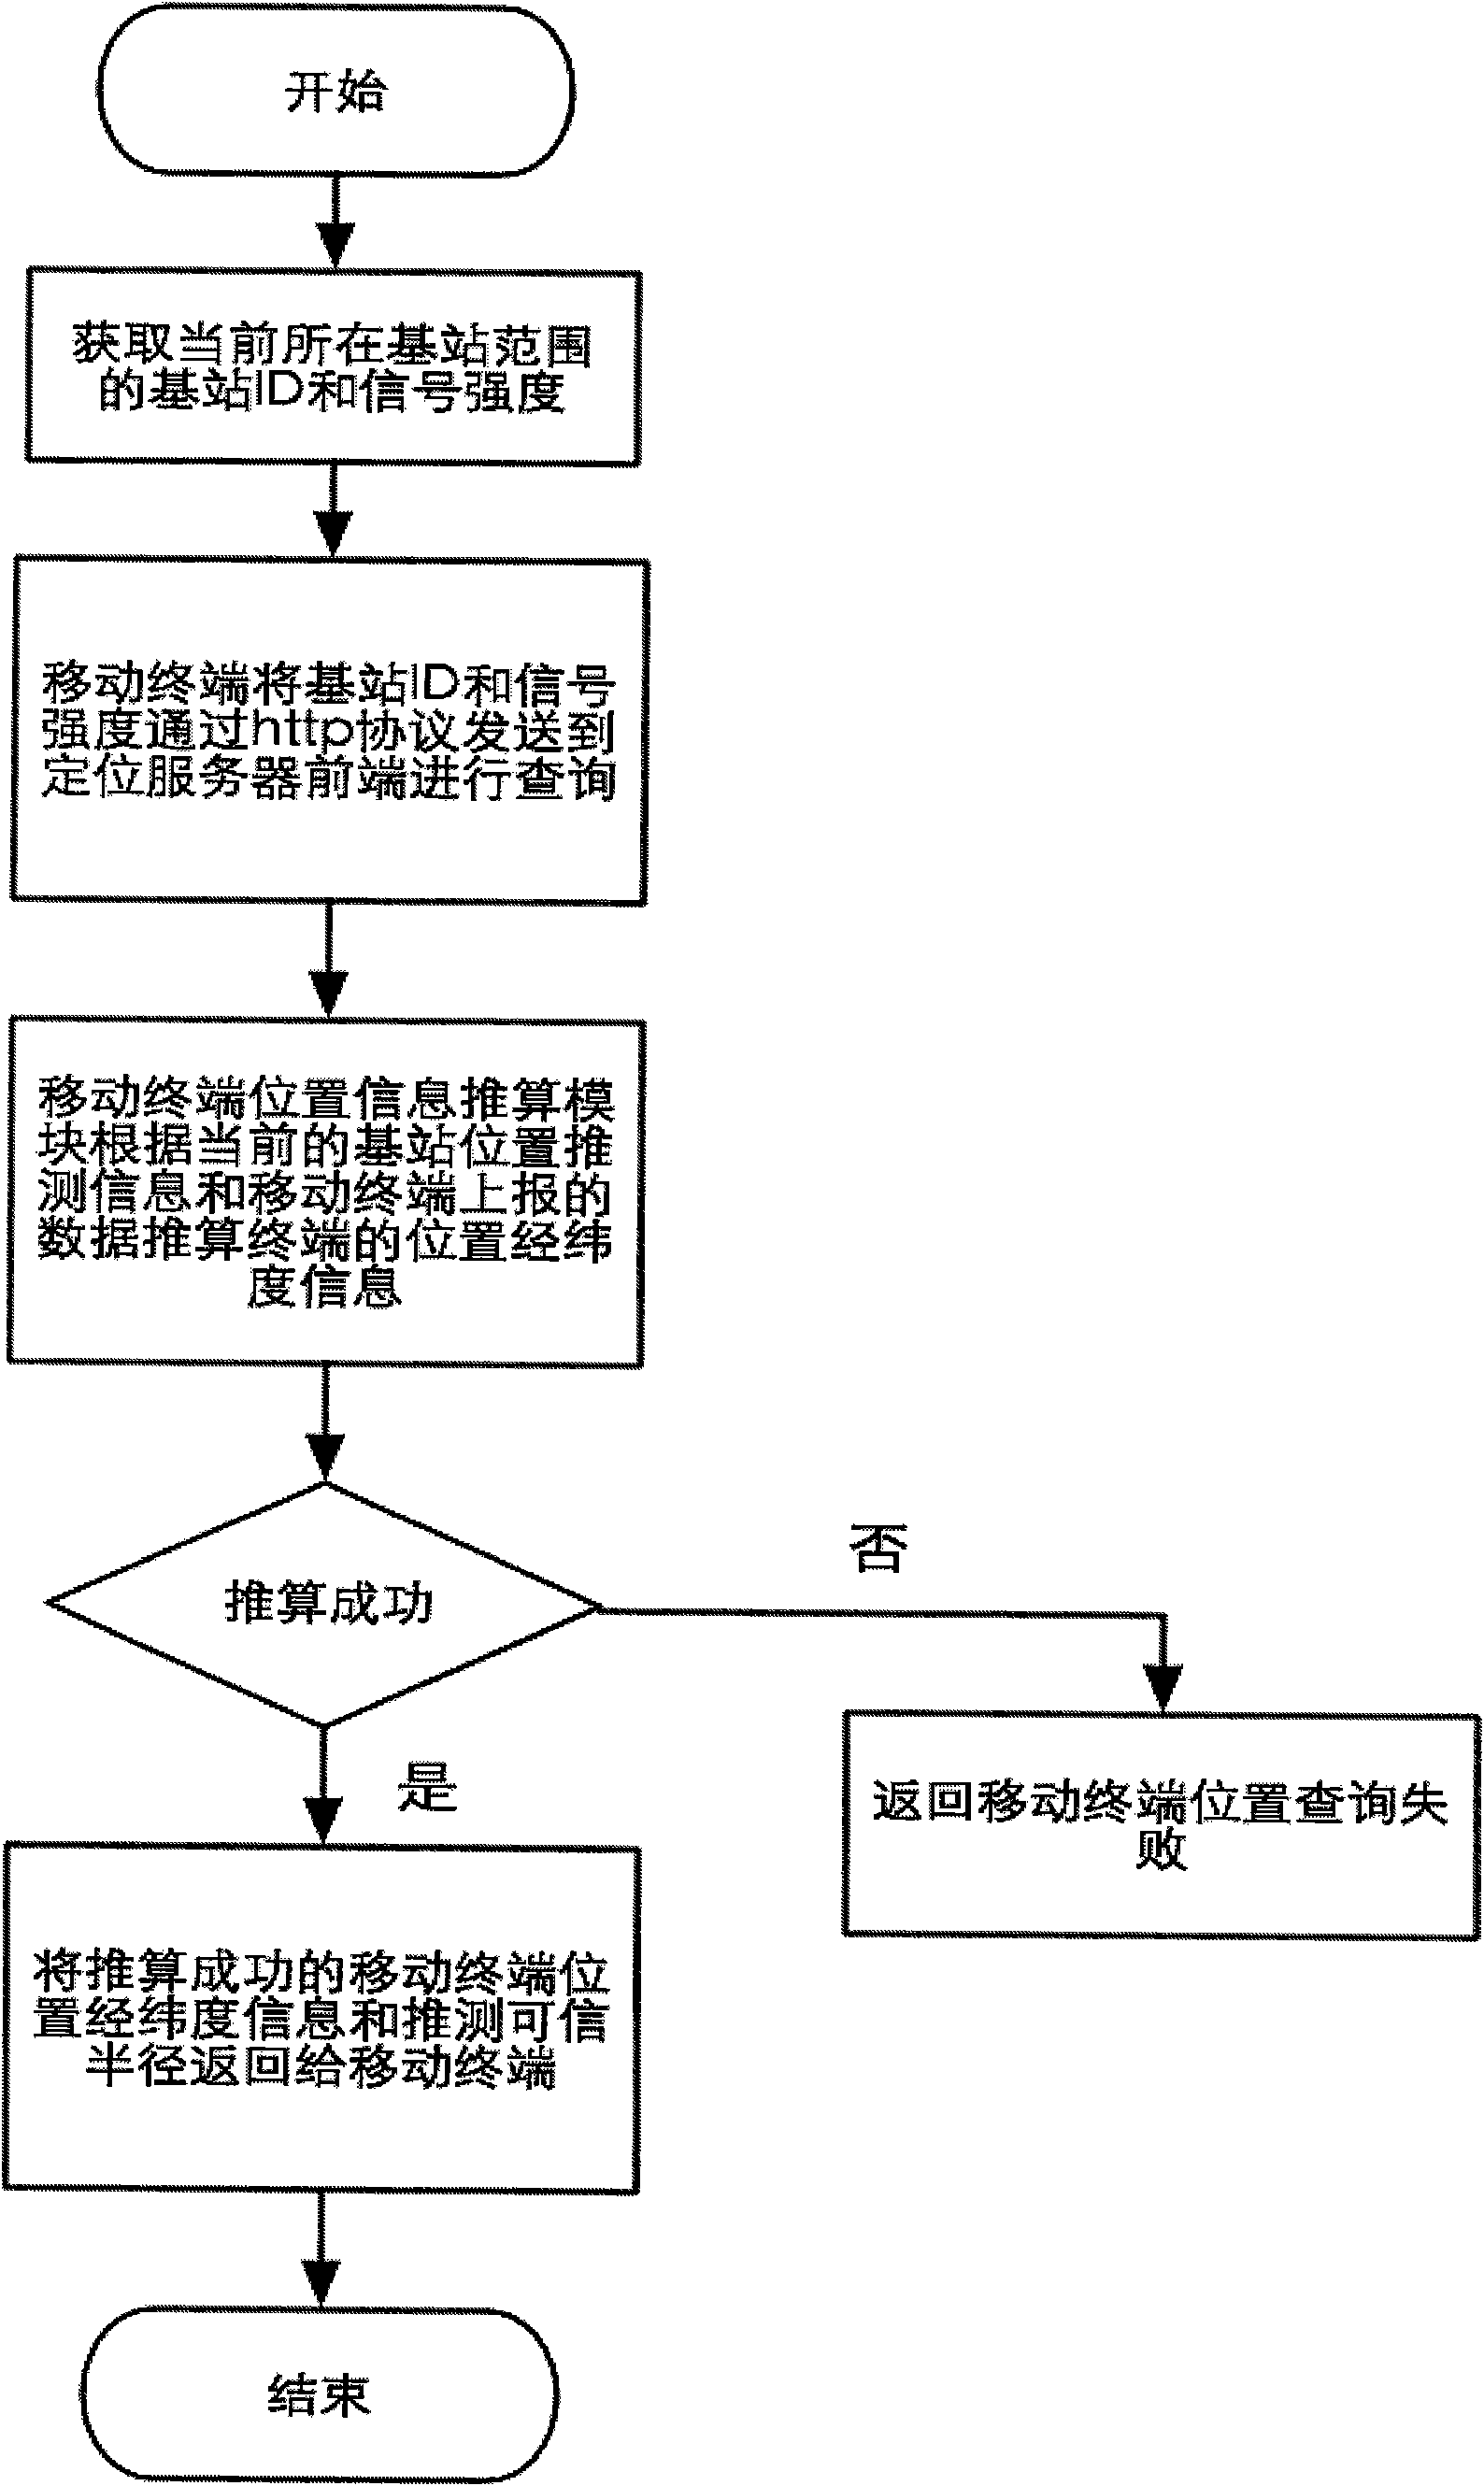 Mobile terminal positioning method and system independent of base station positioning information